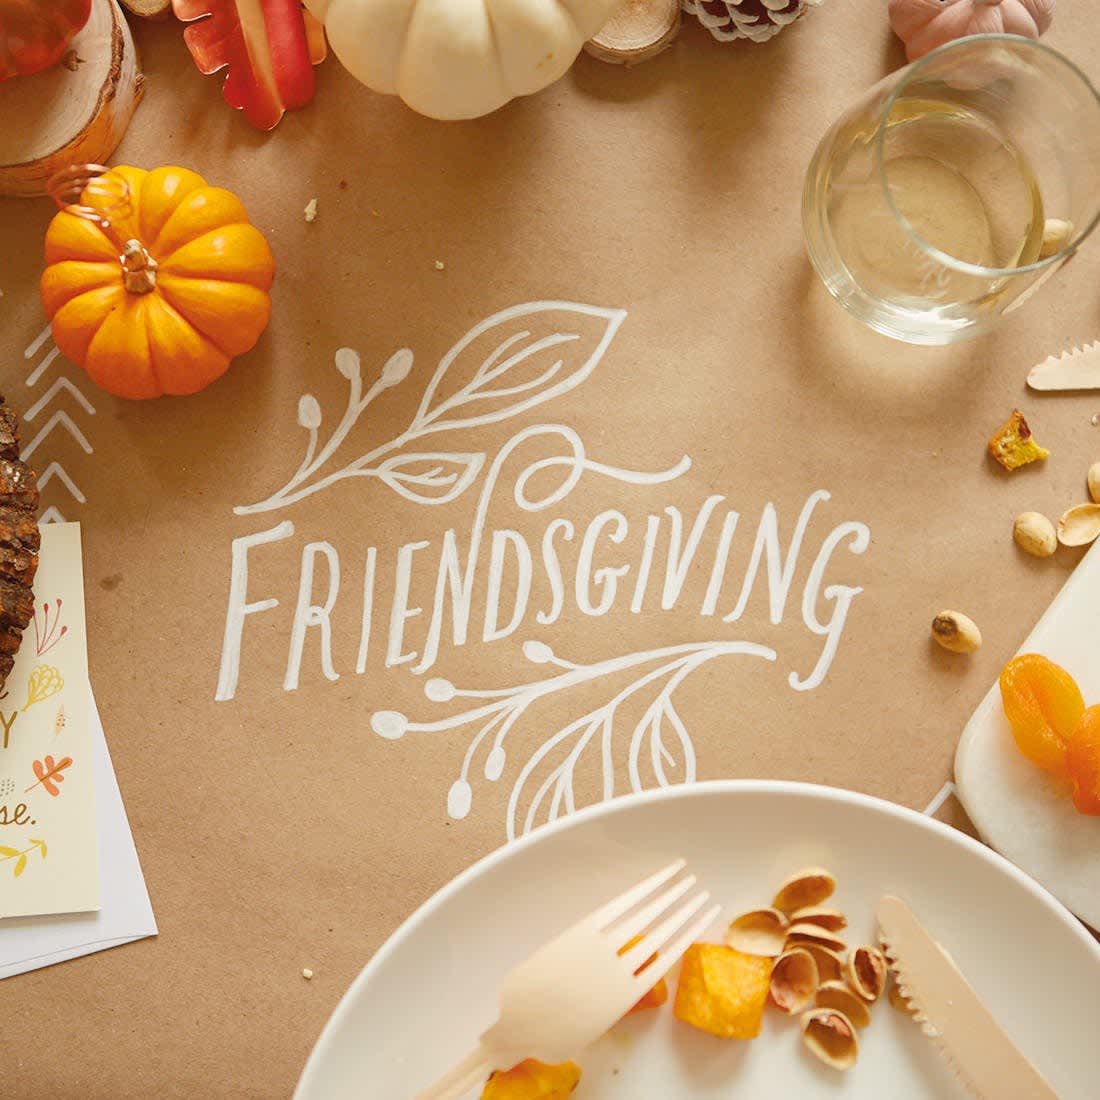 A Friendsgiving placesetting